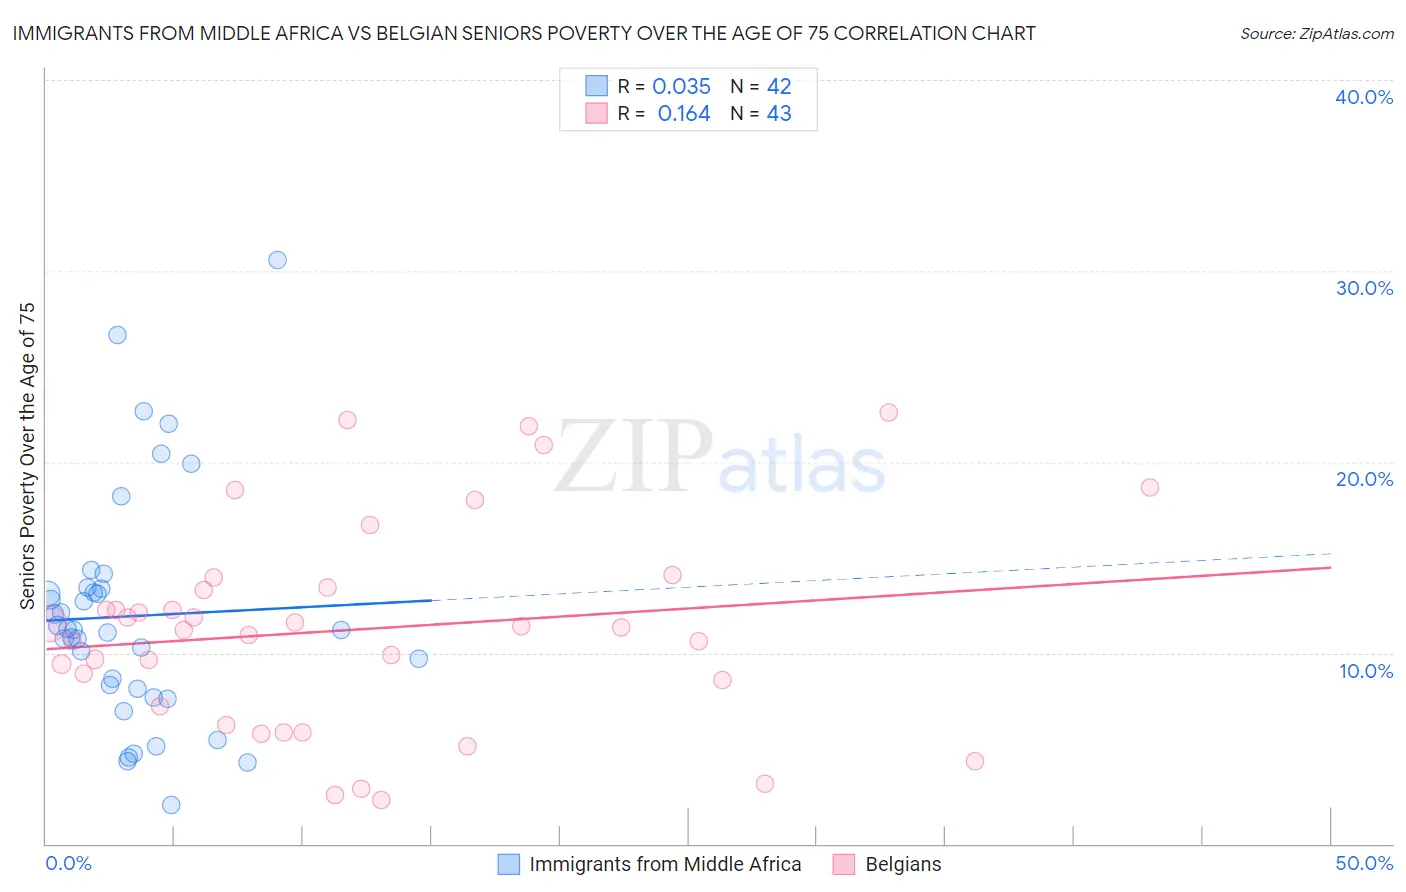 Immigrants from Middle Africa vs Belgian Seniors Poverty Over the Age of 75